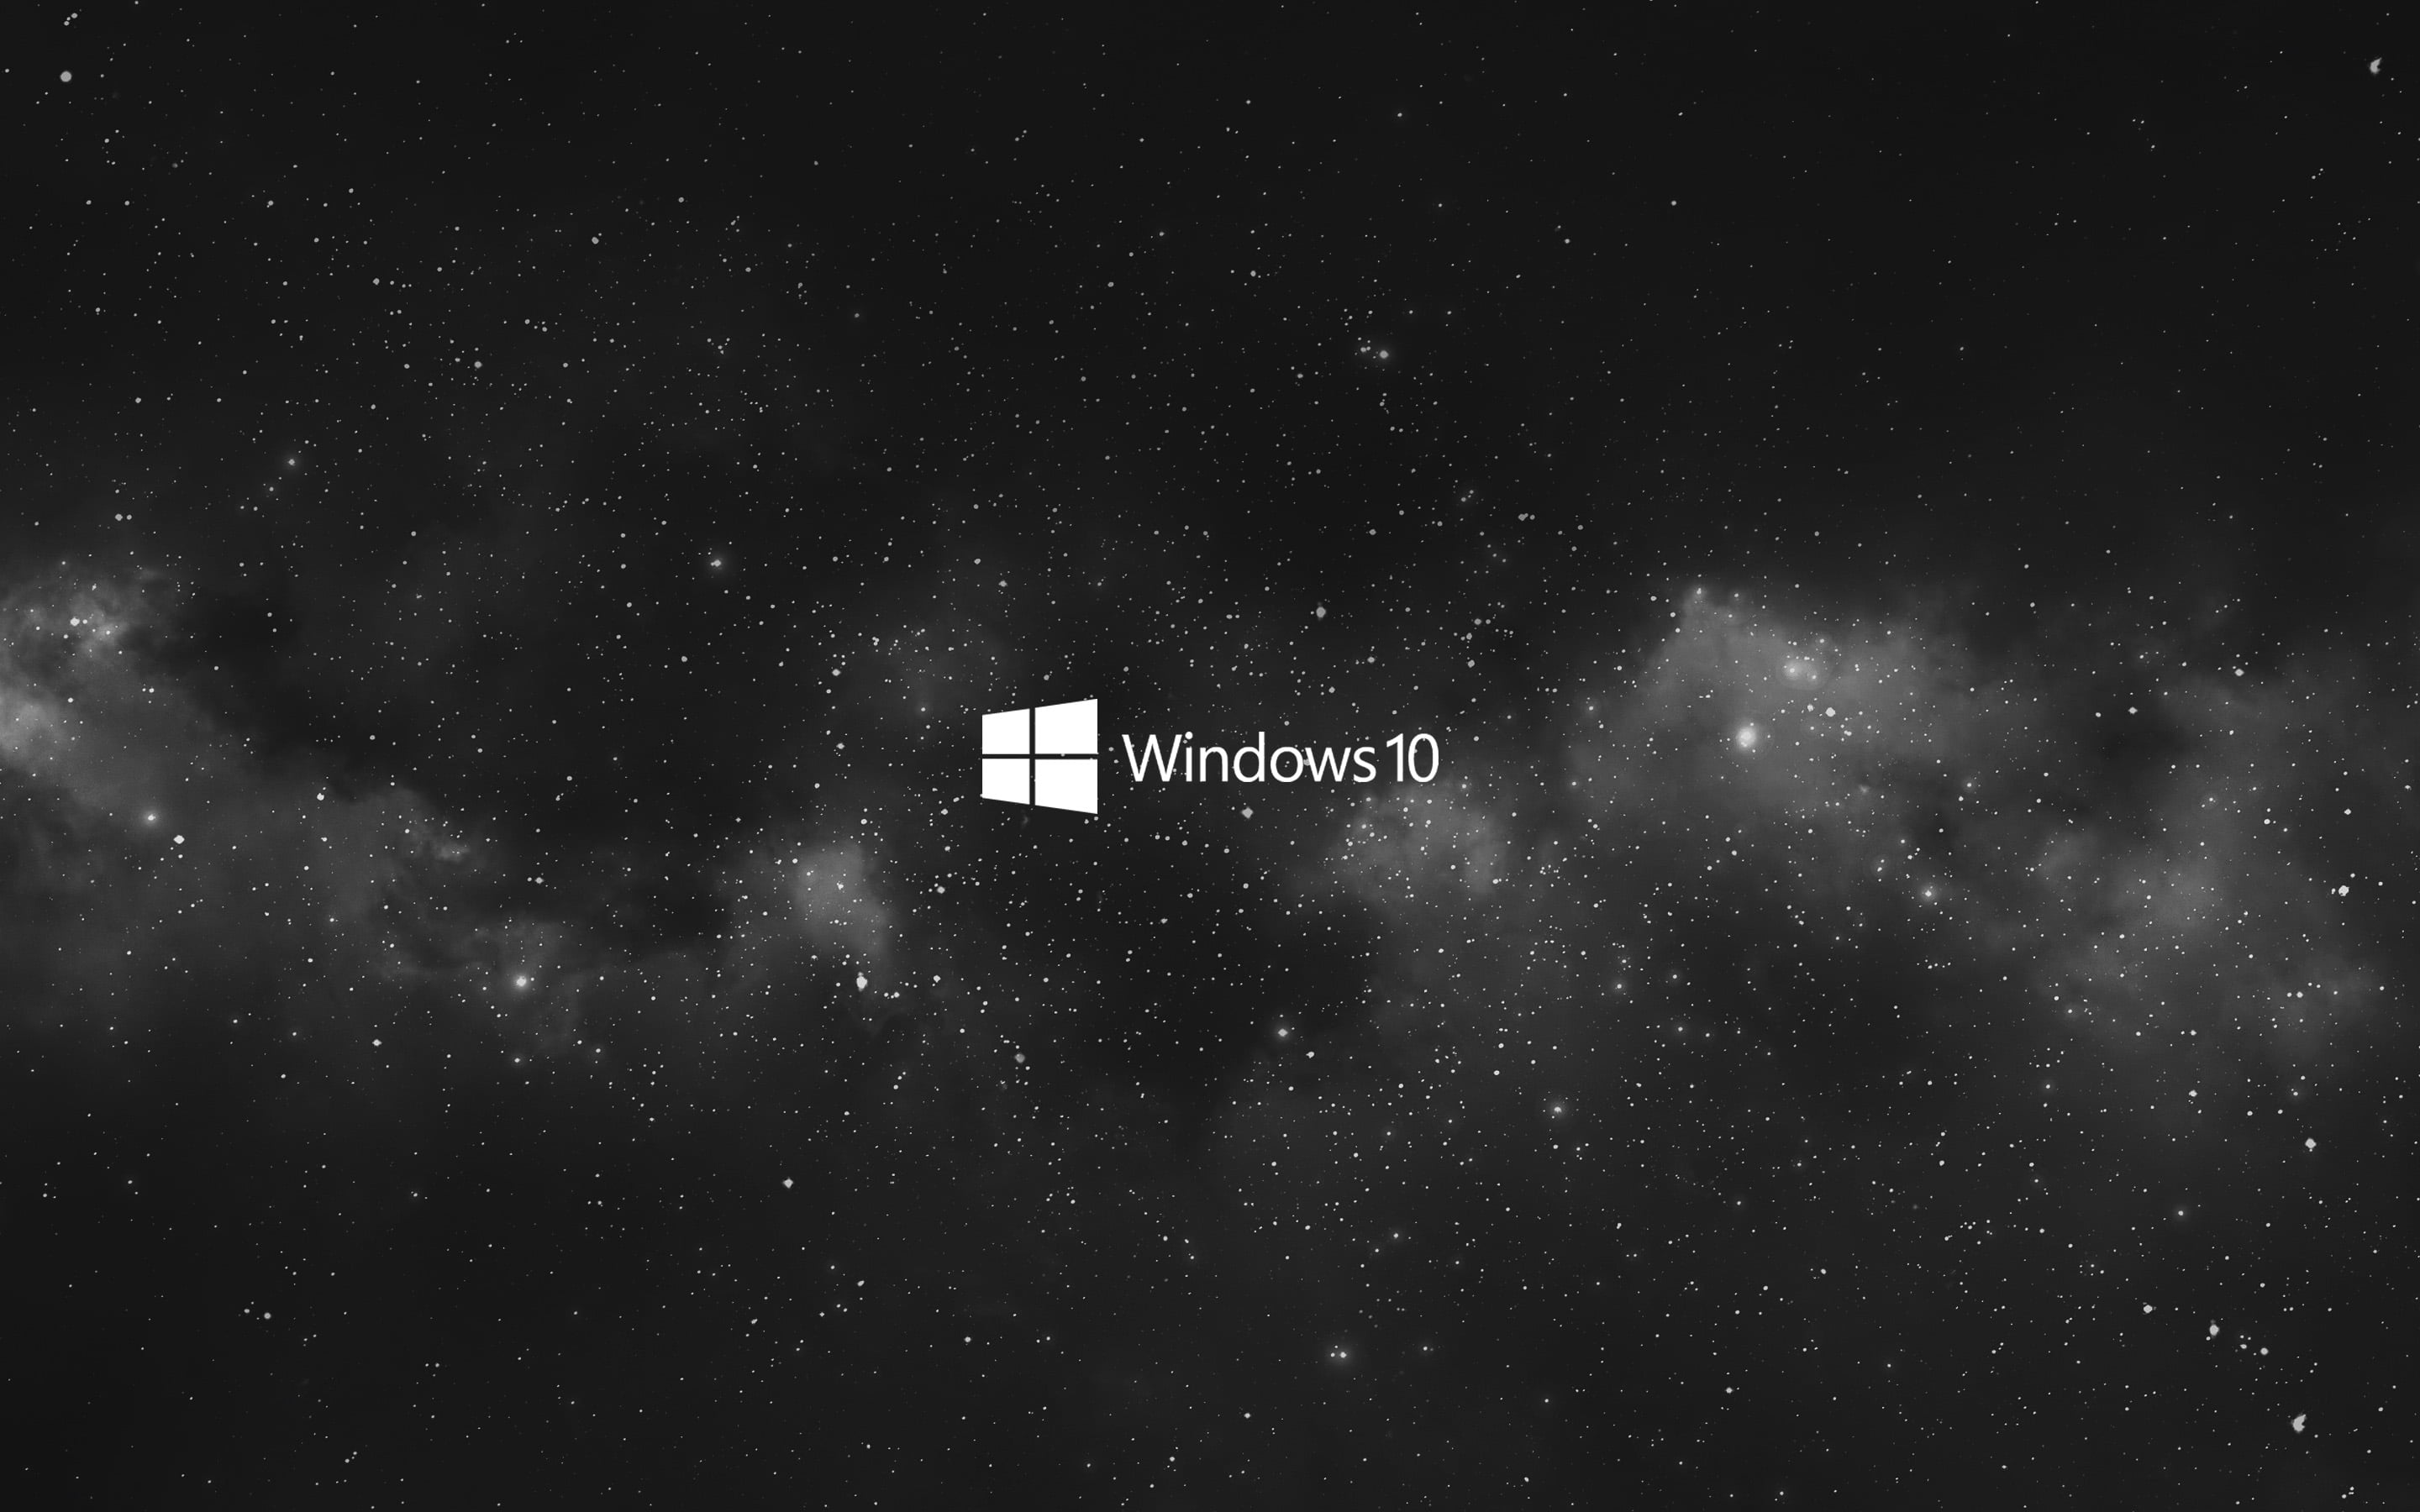 Galaxy Laptop Windows 10, text, white, glowing, space